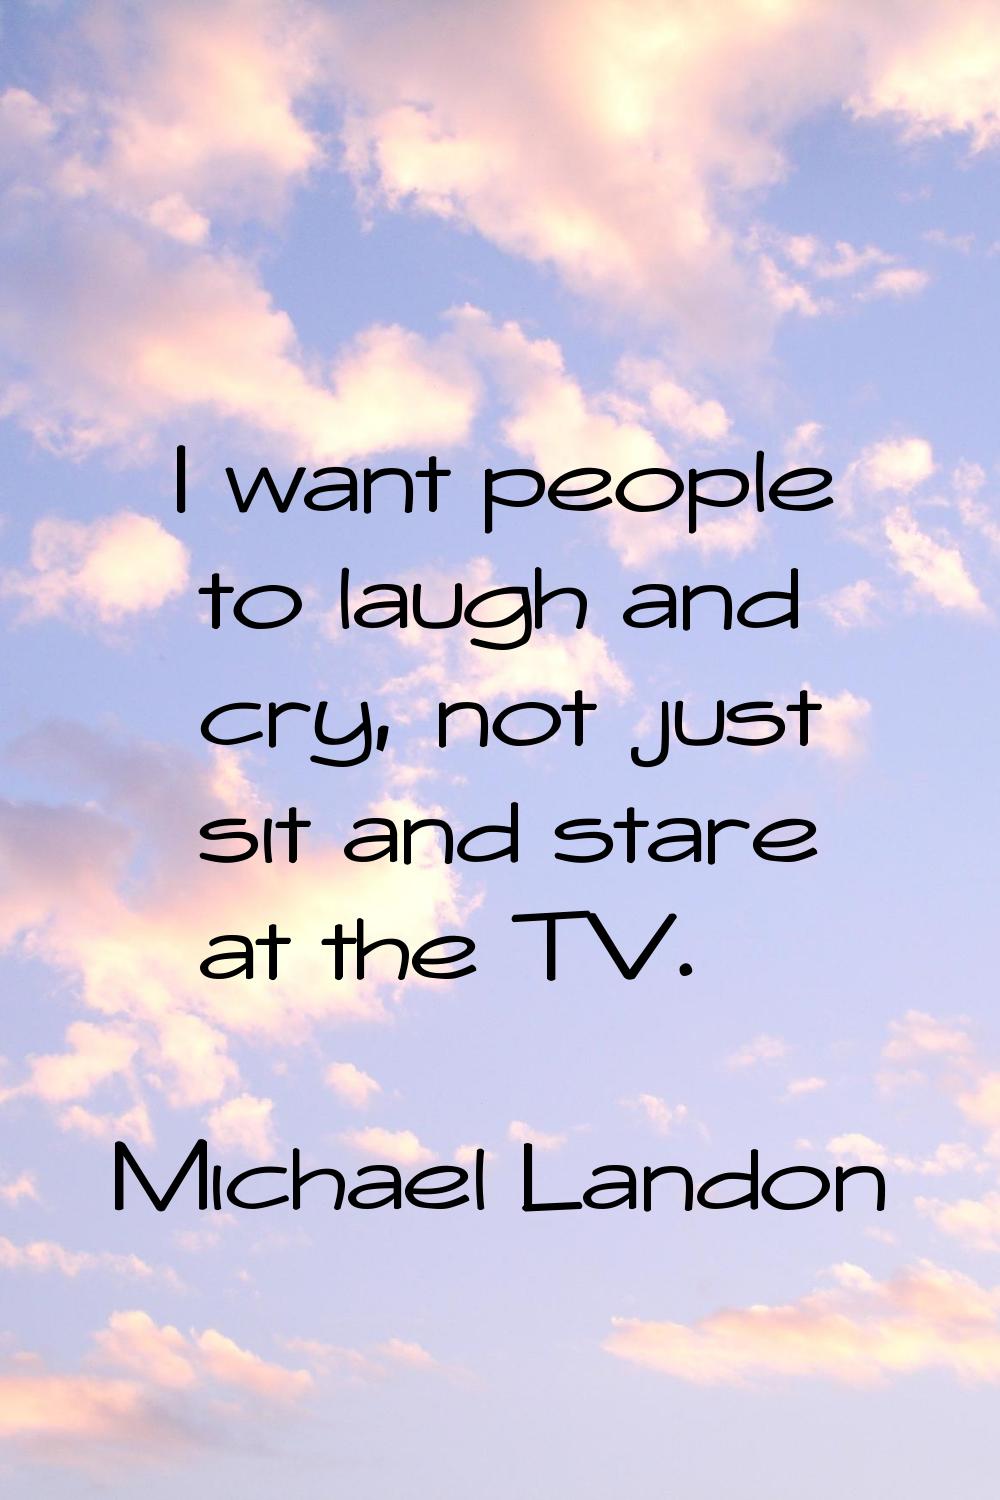 I want people to laugh and cry, not just sit and stare at the TV.